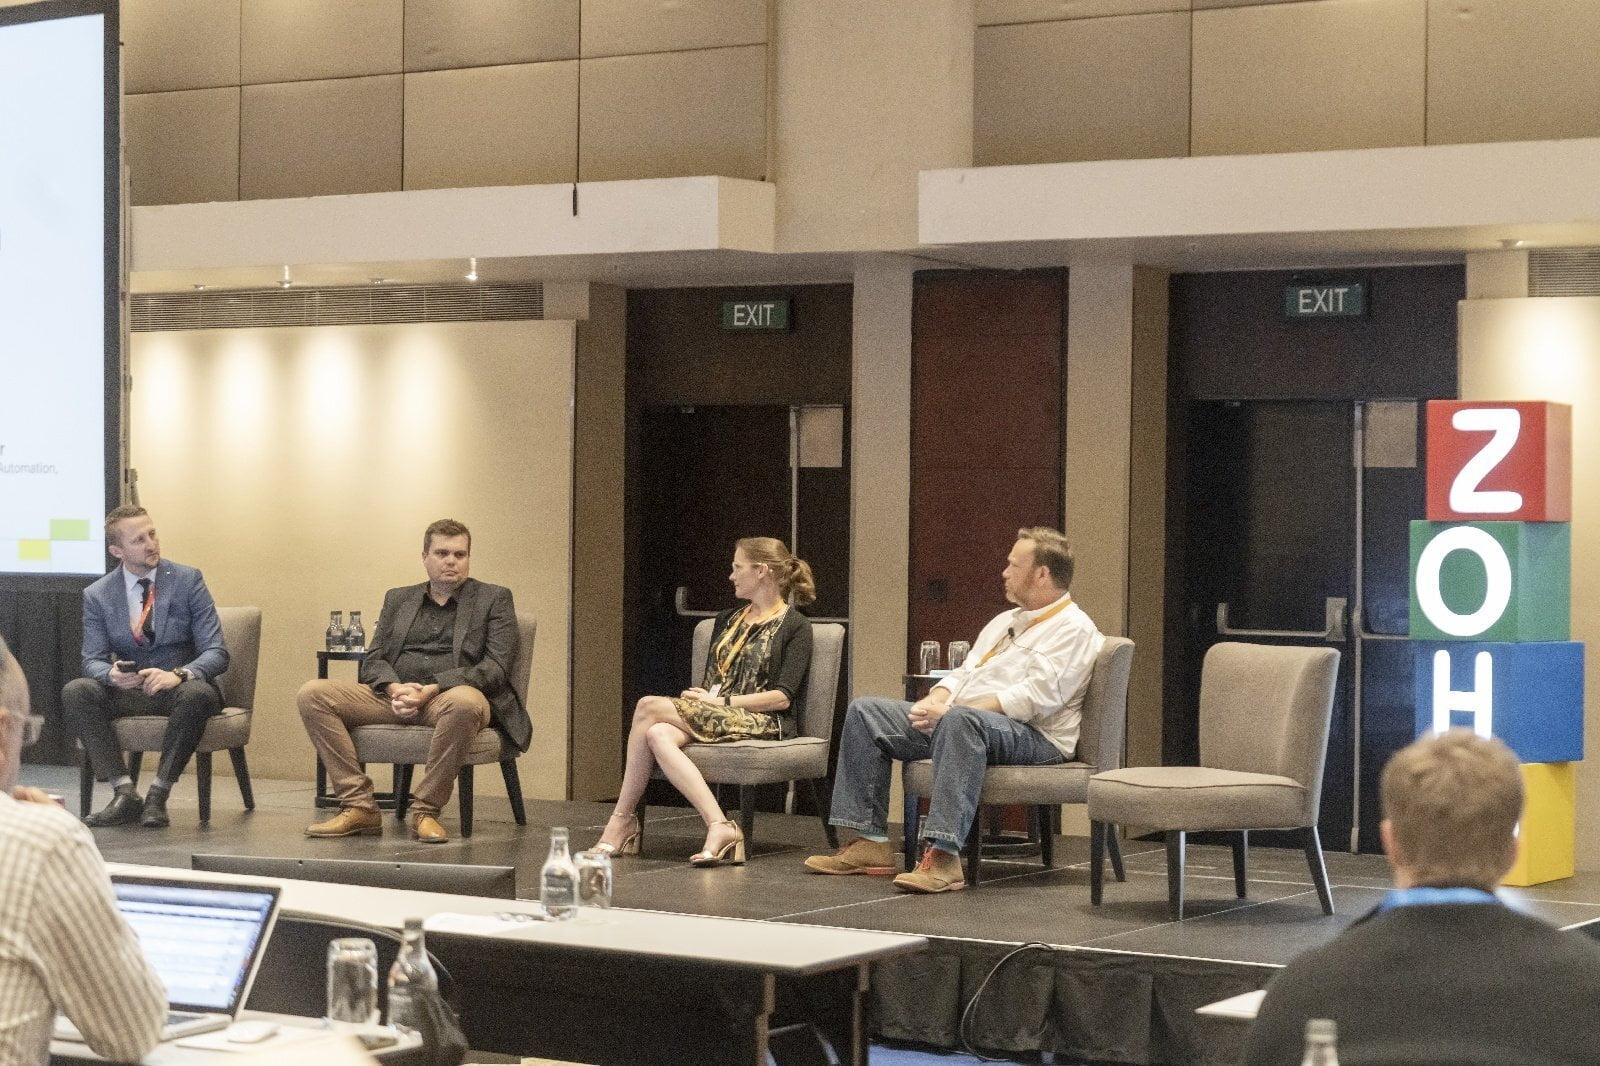 An Image of Paul Wilson, DSL Telecom's Technical DIrector in a panel discussion at the Zoholics Cape Town event